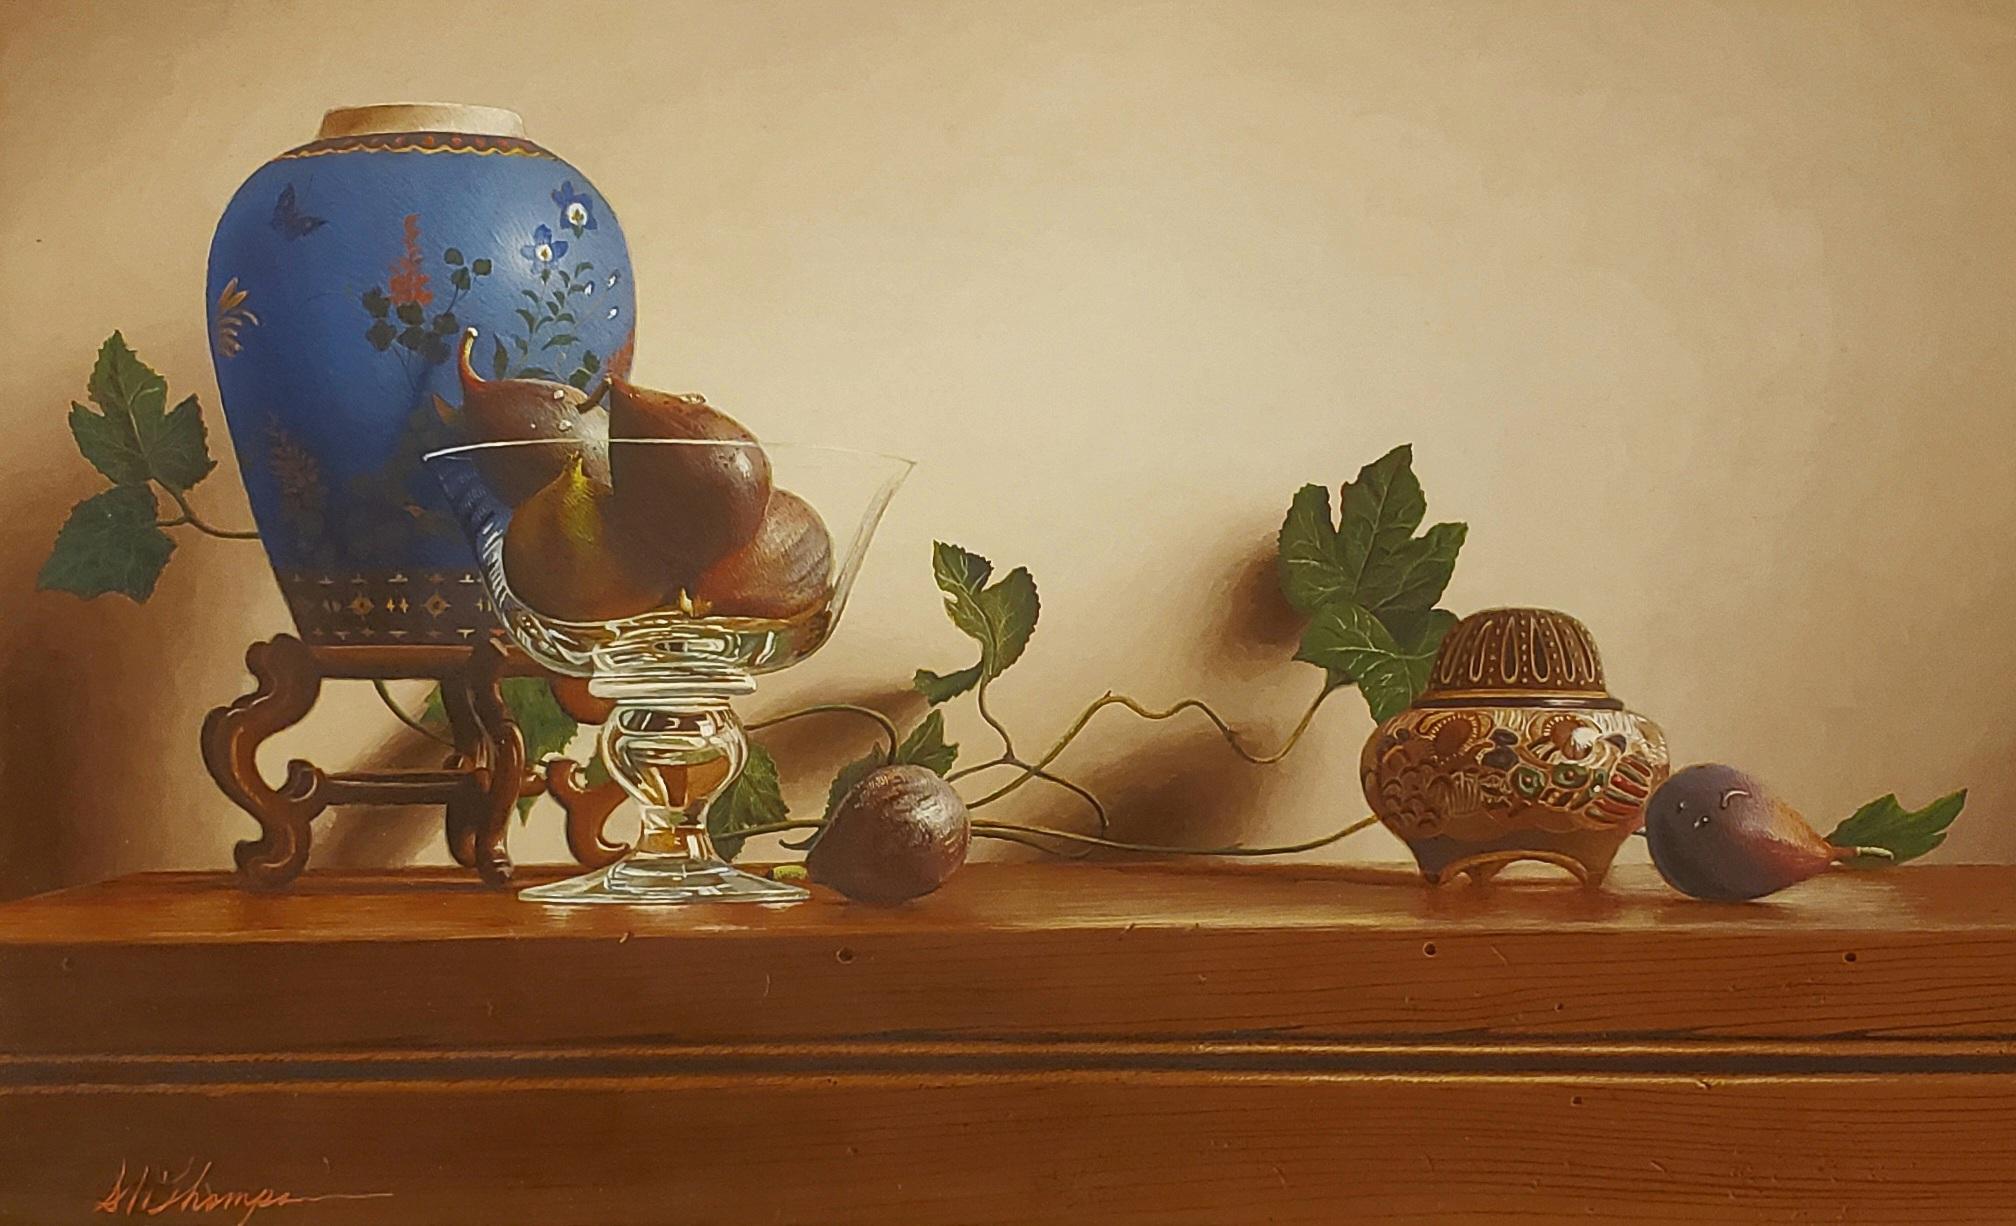 Strawberries and Cream by realist painter Mark Thompson is 9.5 x 7.5 inches. It is painted in egg tempera which goes back centuries in the art world. Notice the reflections in the painting. It appears to be 3D or a photograph but this is